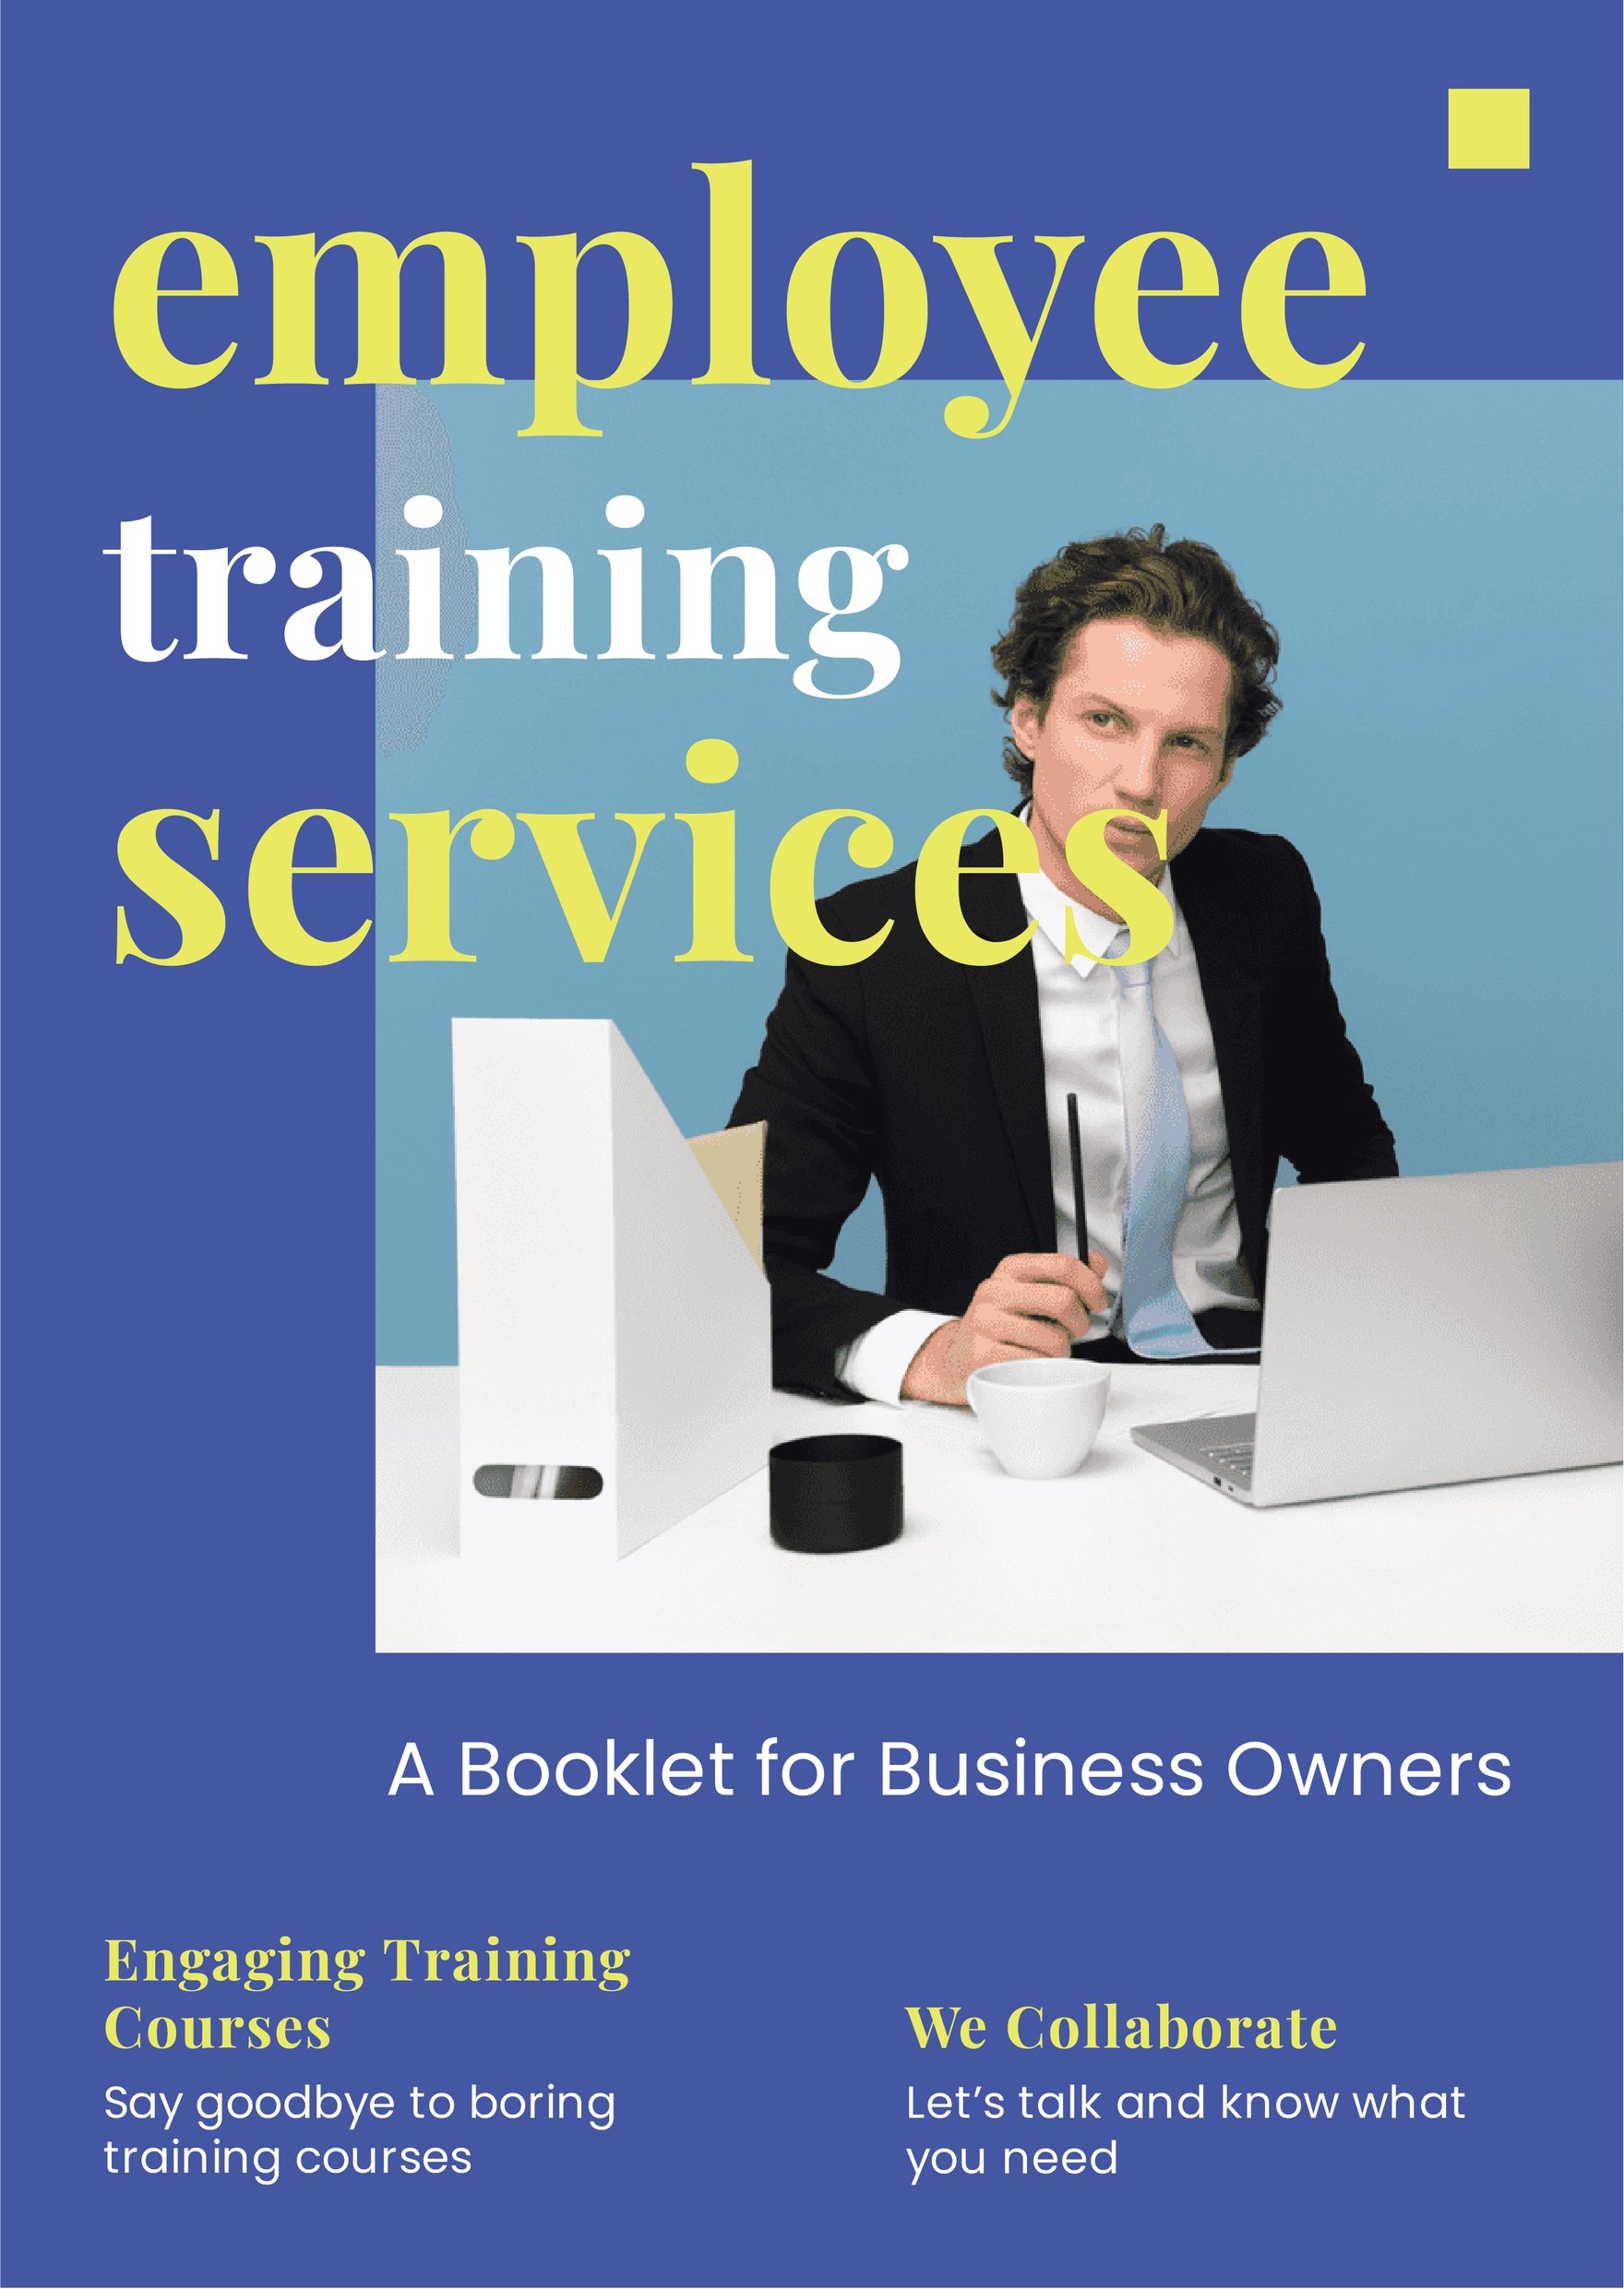 Free Employee Training Booklet Template in Word, Google Docs, Illustrator, PSD, Apple Pages, Publisher